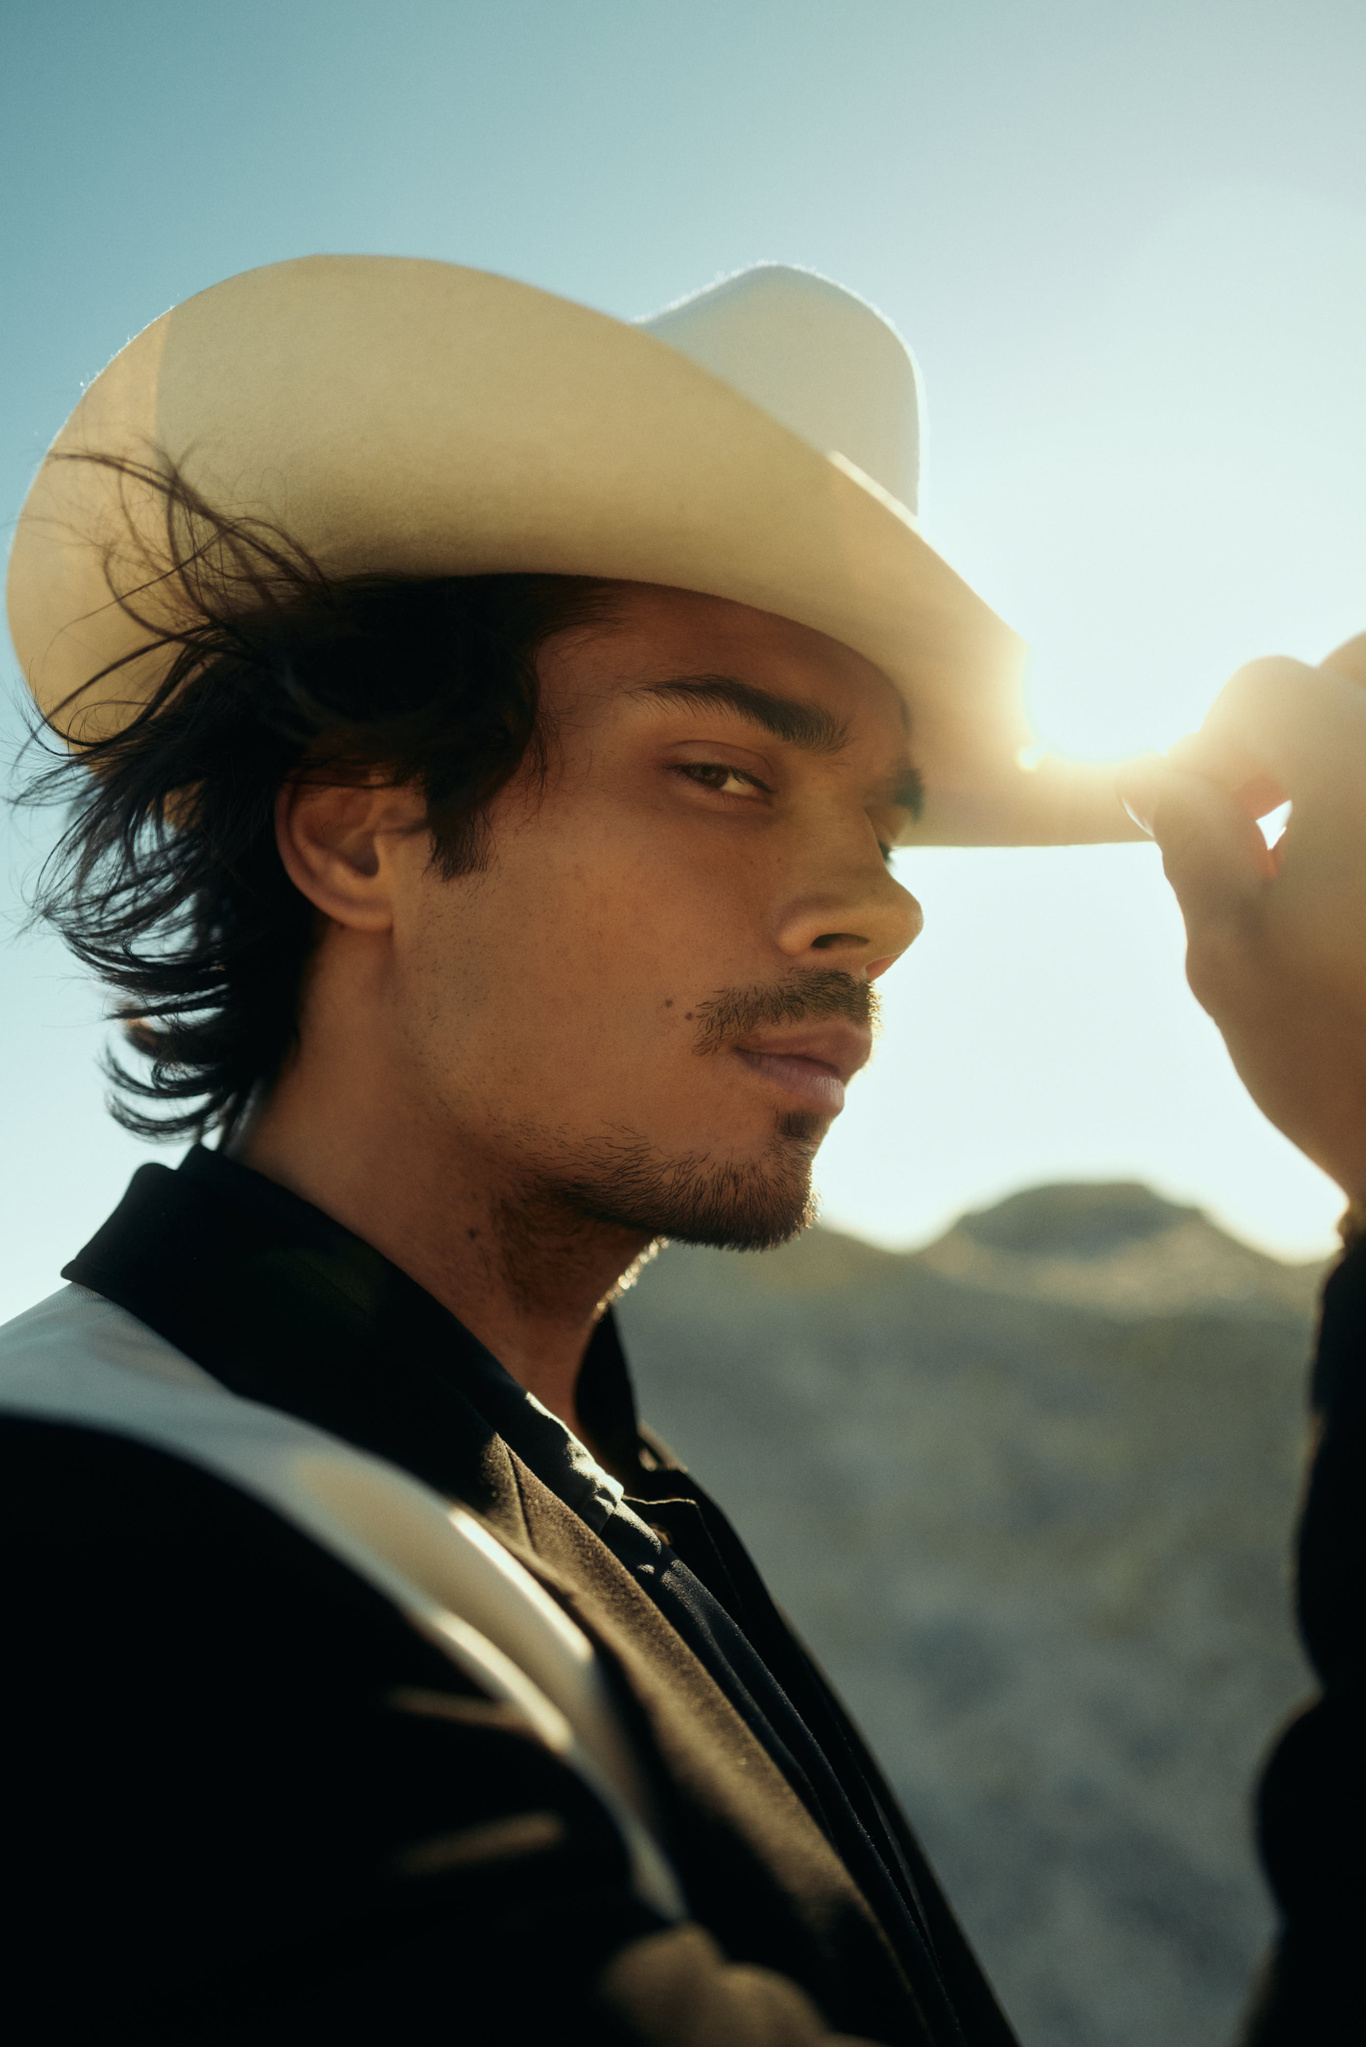 Drew Ray Tanner from CW Riverdale wearing a cowboy hat in the desert